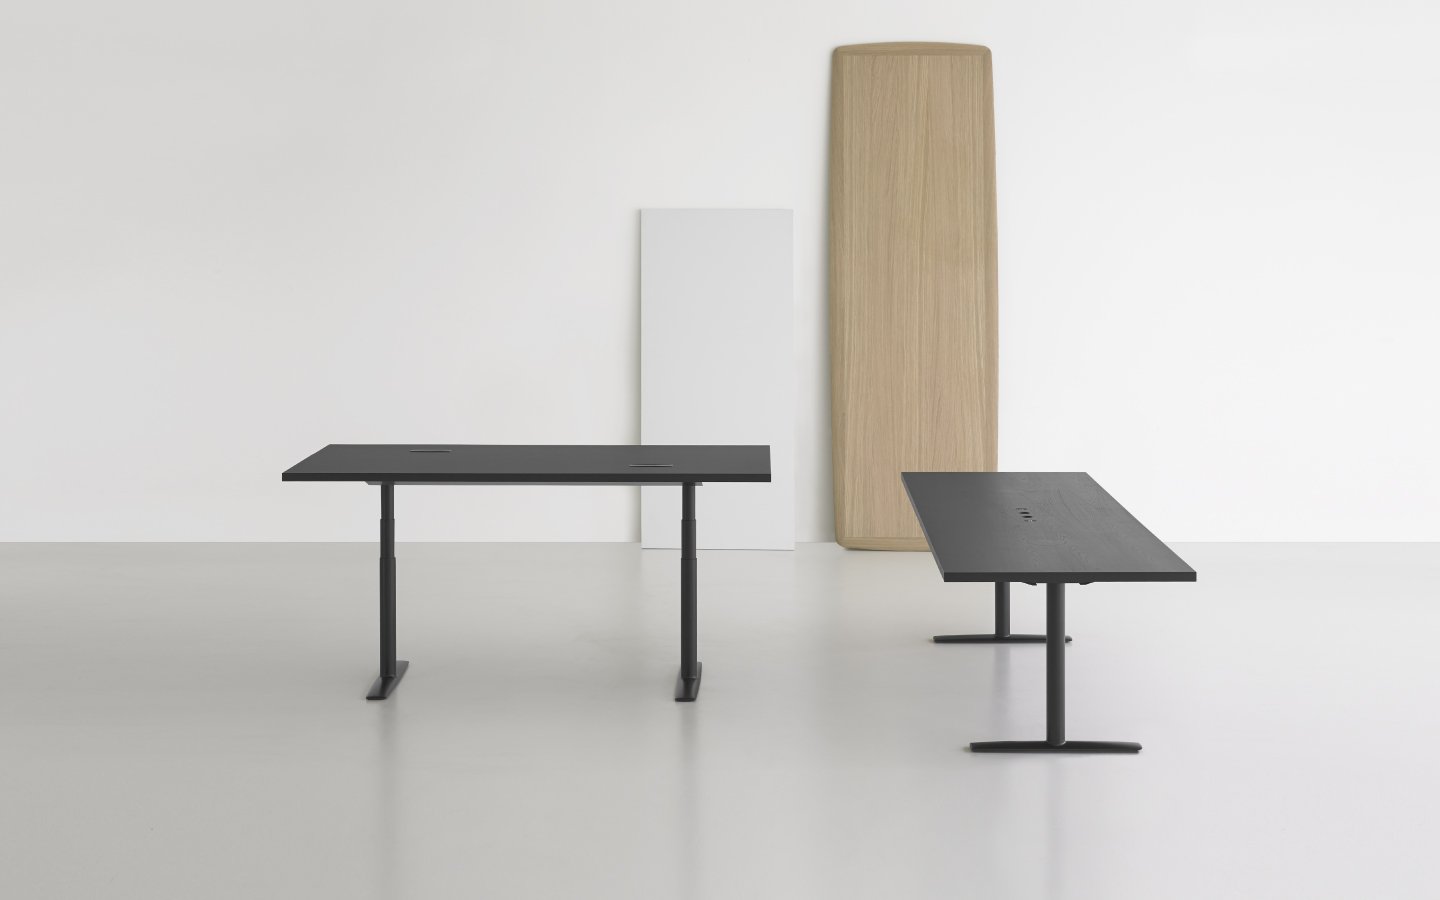 Acca Table desk from lapalma, designed by Francesco Rota